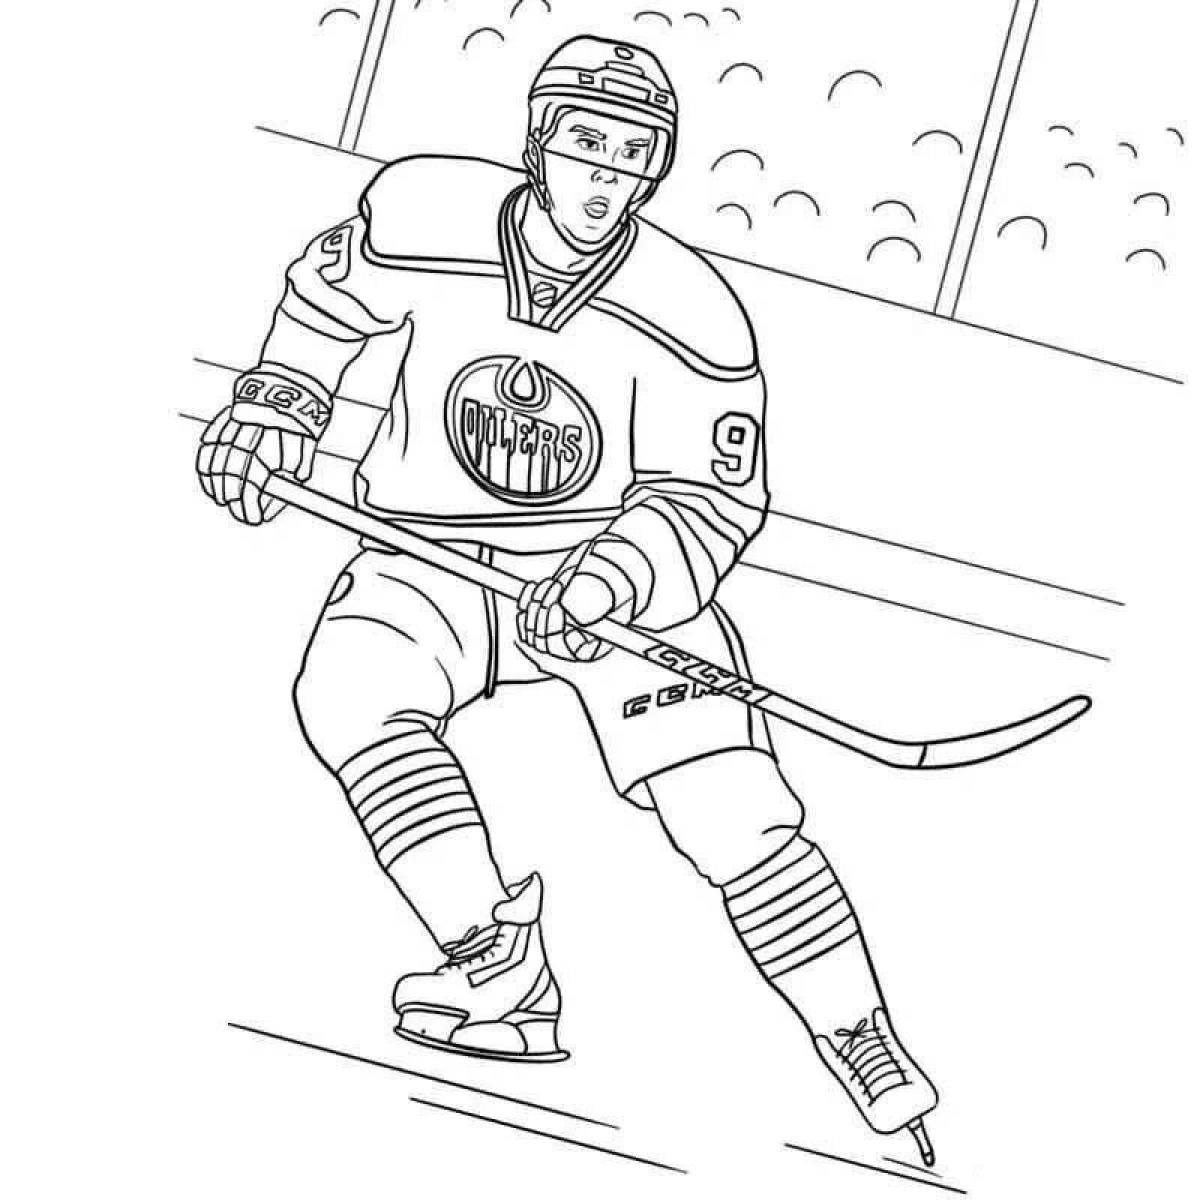 Ak bars playful coloring page